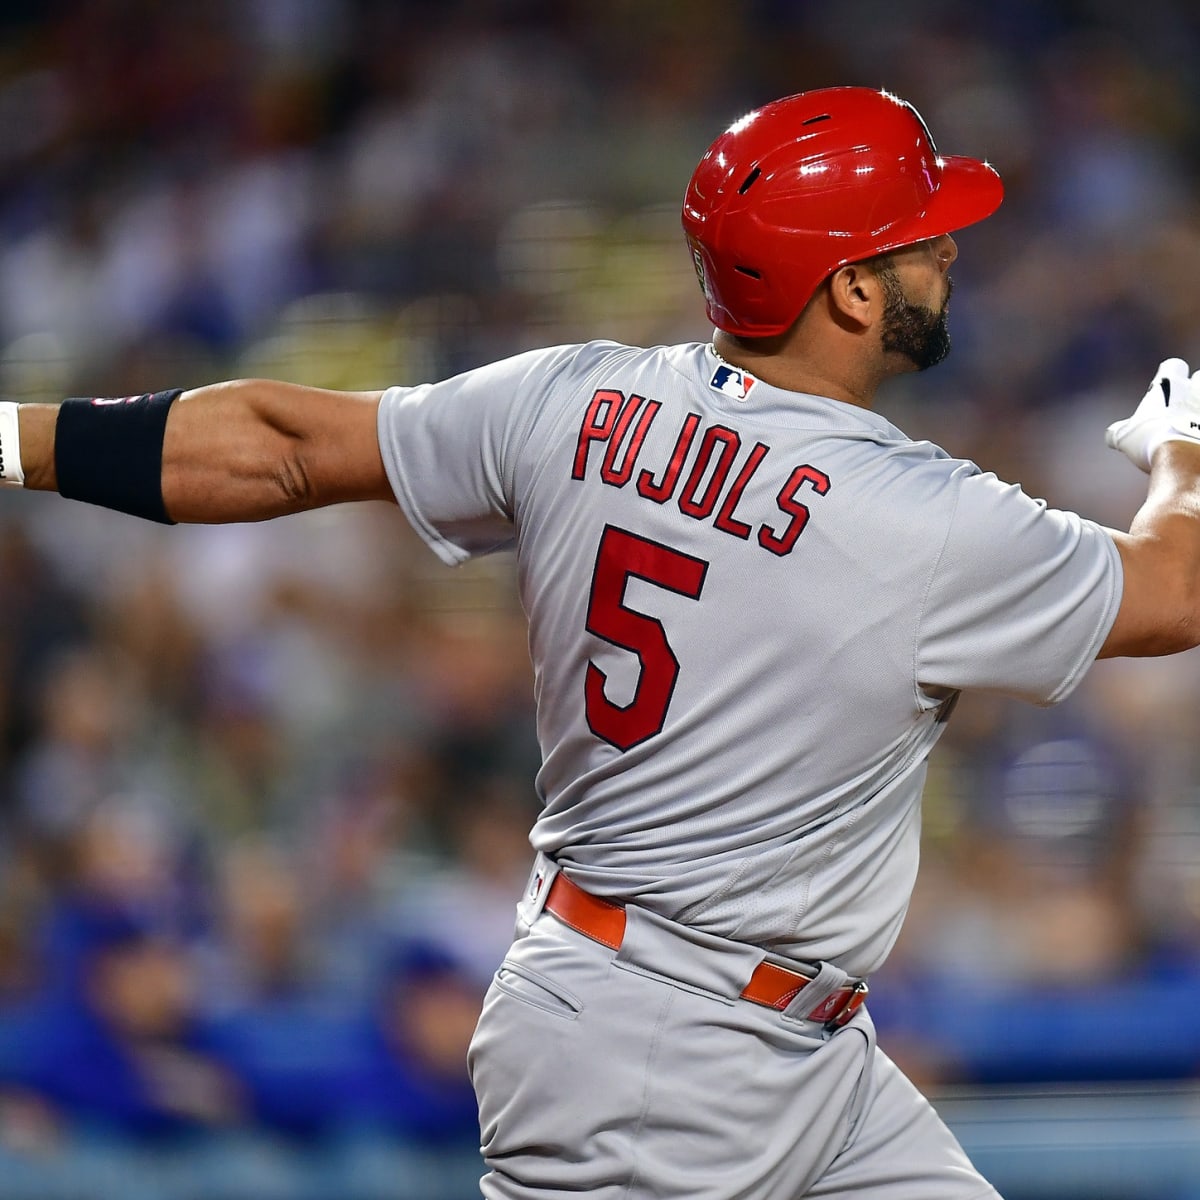 Albert Pujols becomes the 4th player in MLB history to hit 700